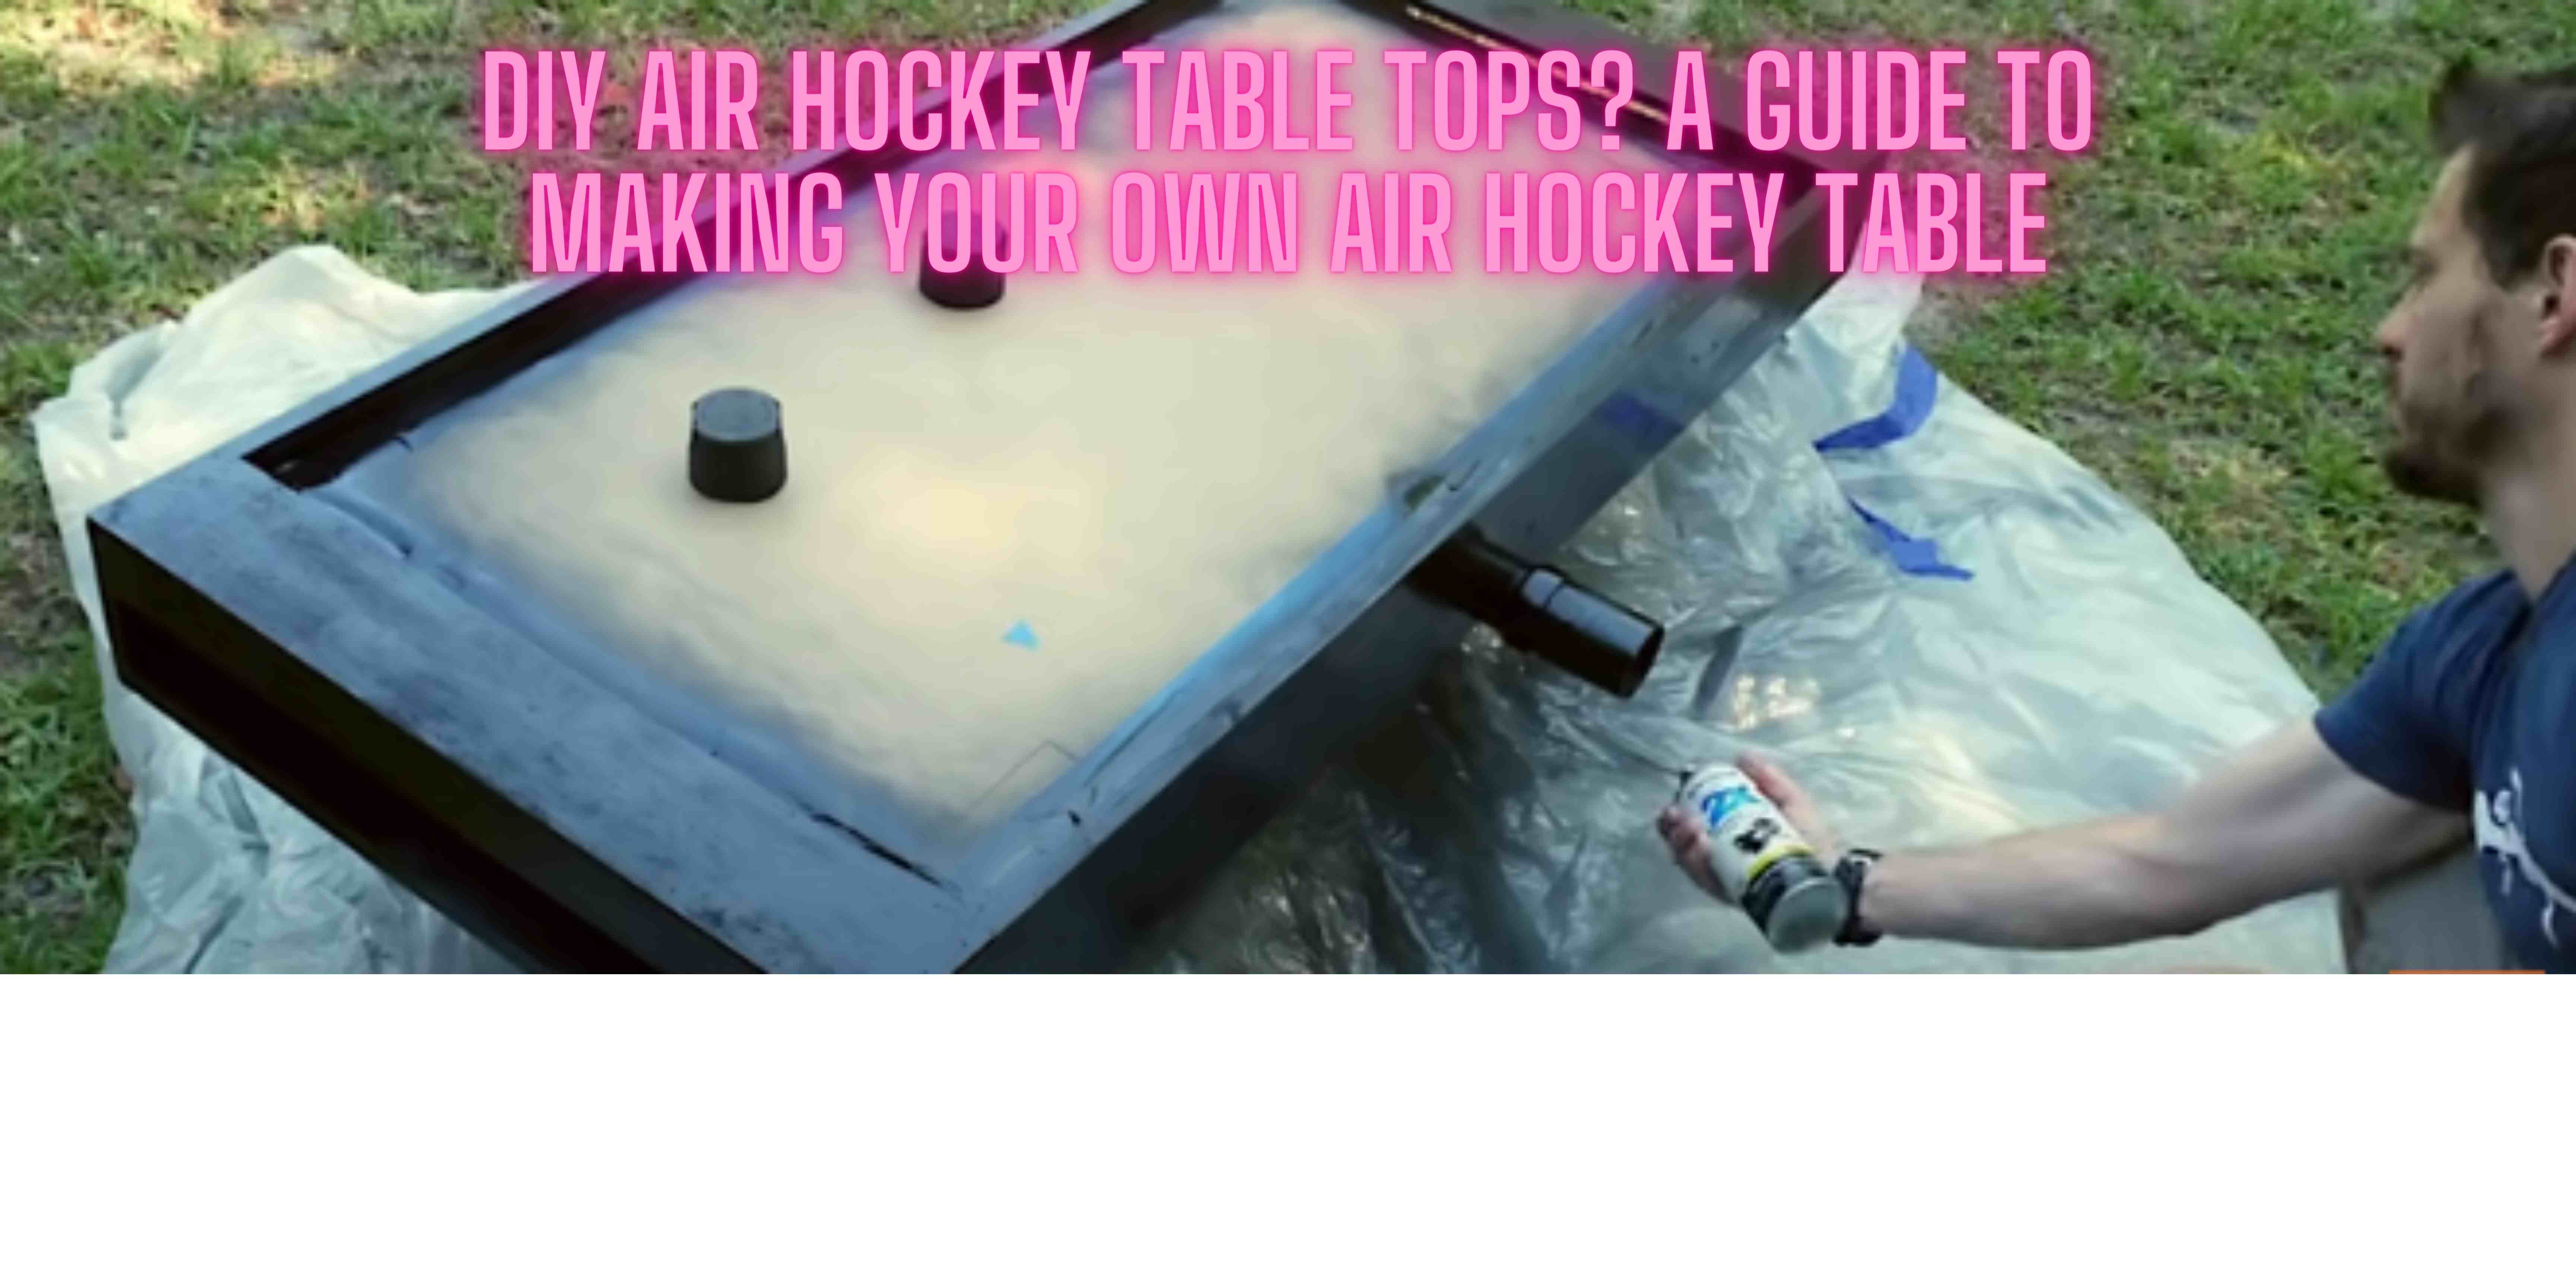 DIY Air Hockey Table Tops? A Guide To Making Your Own Air Hockey Table